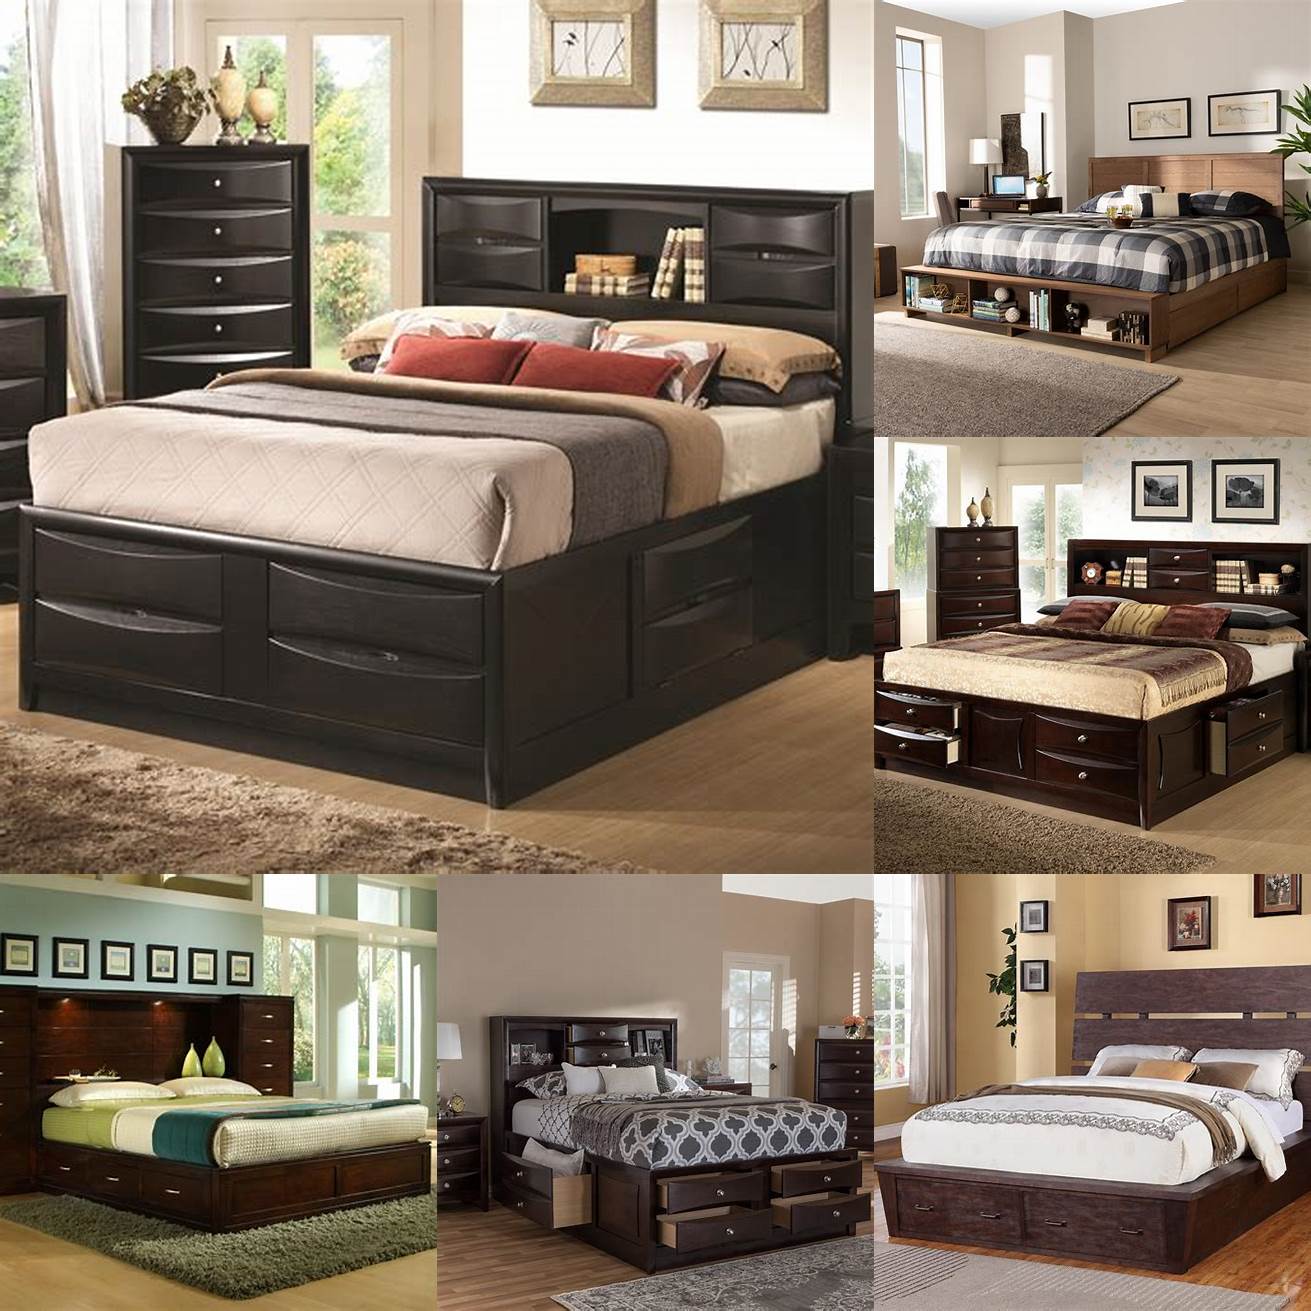 Modern king bed with built-in storage